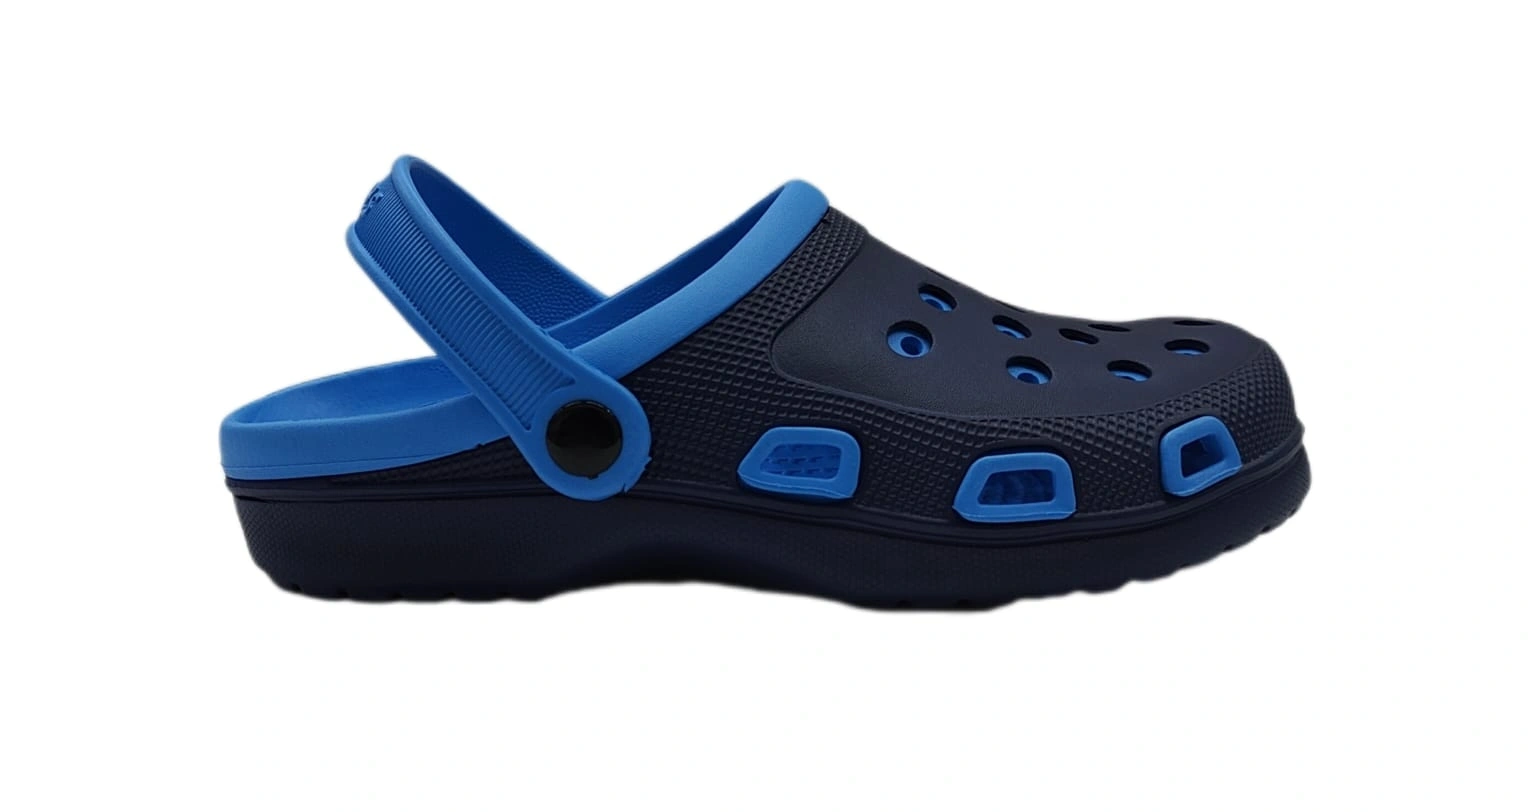 Clog Sandals for Men and Women: Comfortable, Lightweight Design with Durable Upper and Slip-Resistant Outsole for All-Day Wear-Blue-UK 10-1